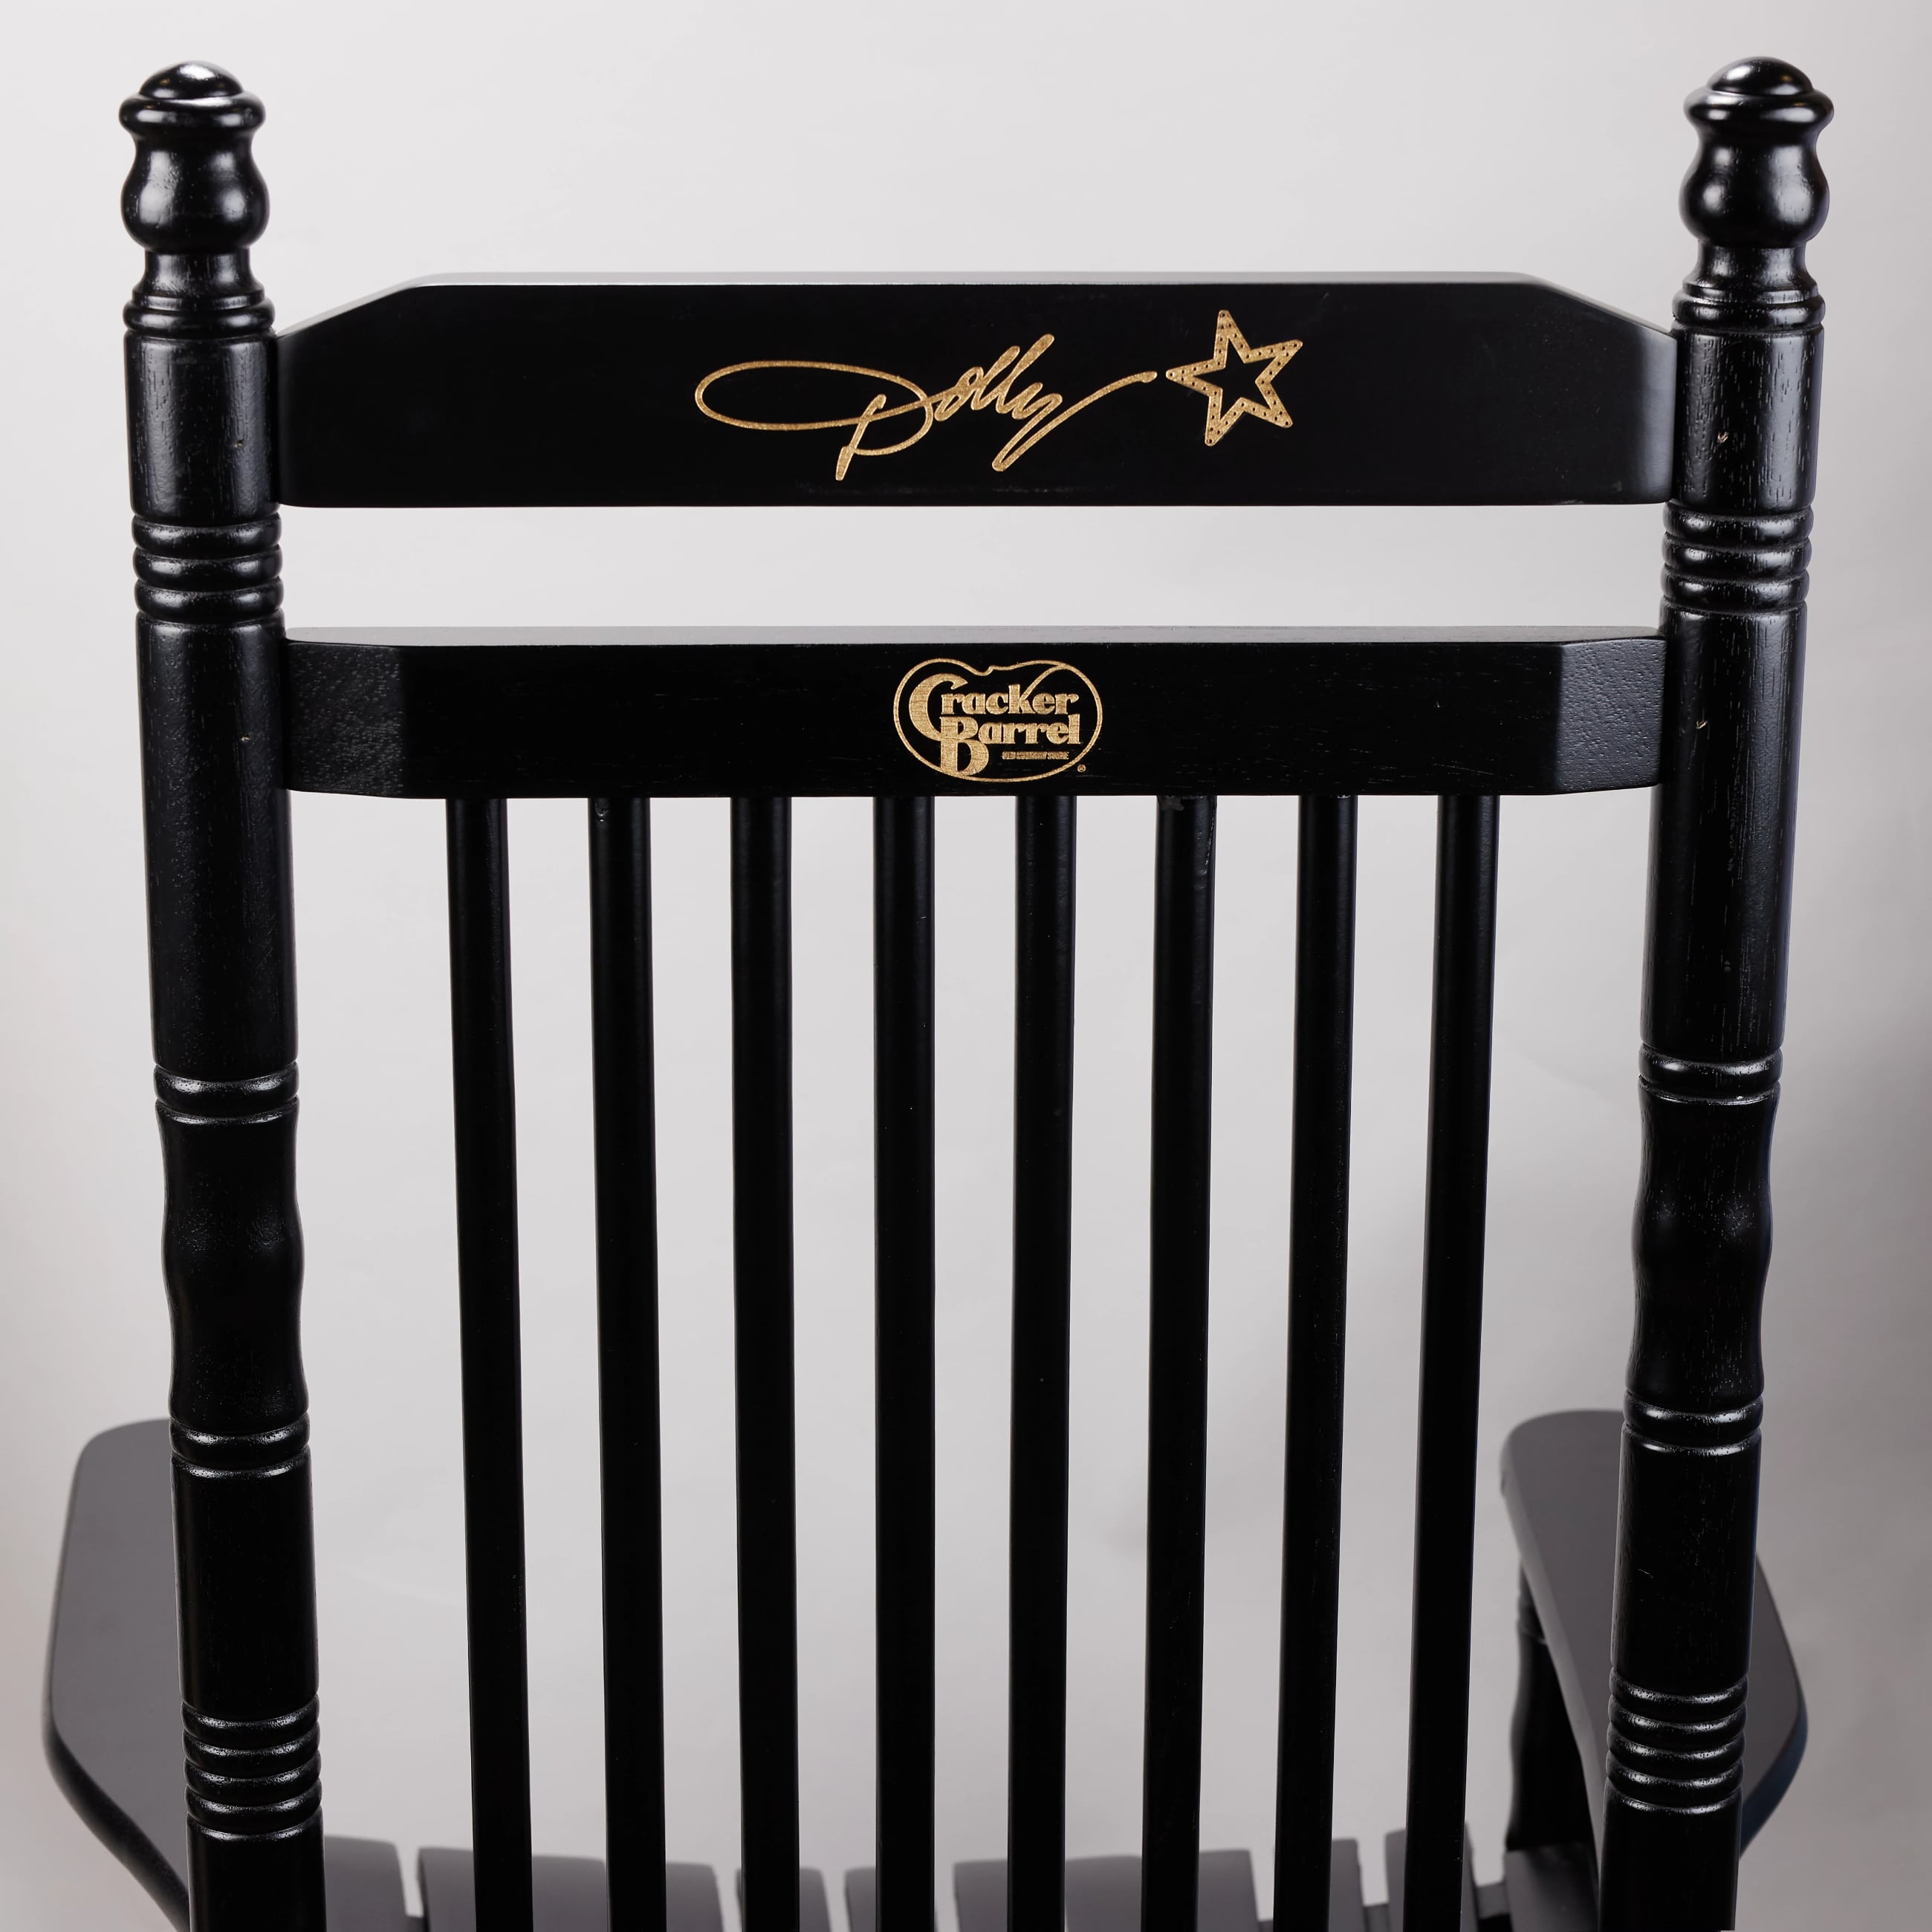 Each Dolly Rockin’ Chair comes with a special touch – Dolly’s signature.